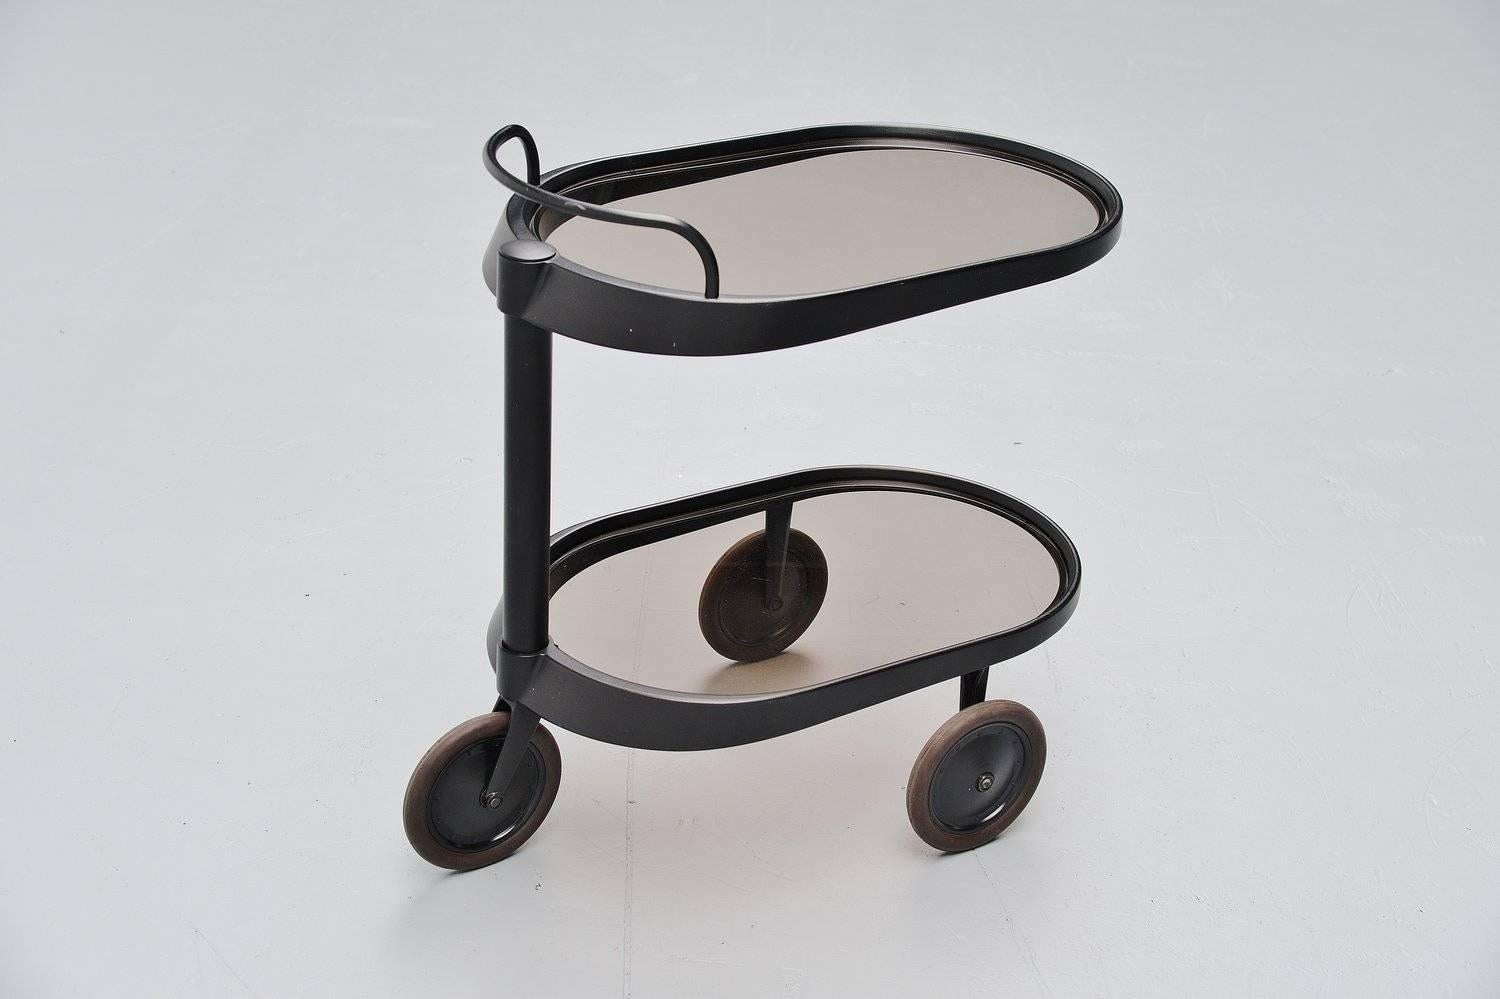 Very nice bar cart designed by Enzo Mari for Alessi, Italy 1989. This rare cart is no longer in production and therefor a real collectible. It is made of solid aluminum, black lacquered and it has 2 smoked glass trays. The cart is marked Alessi on